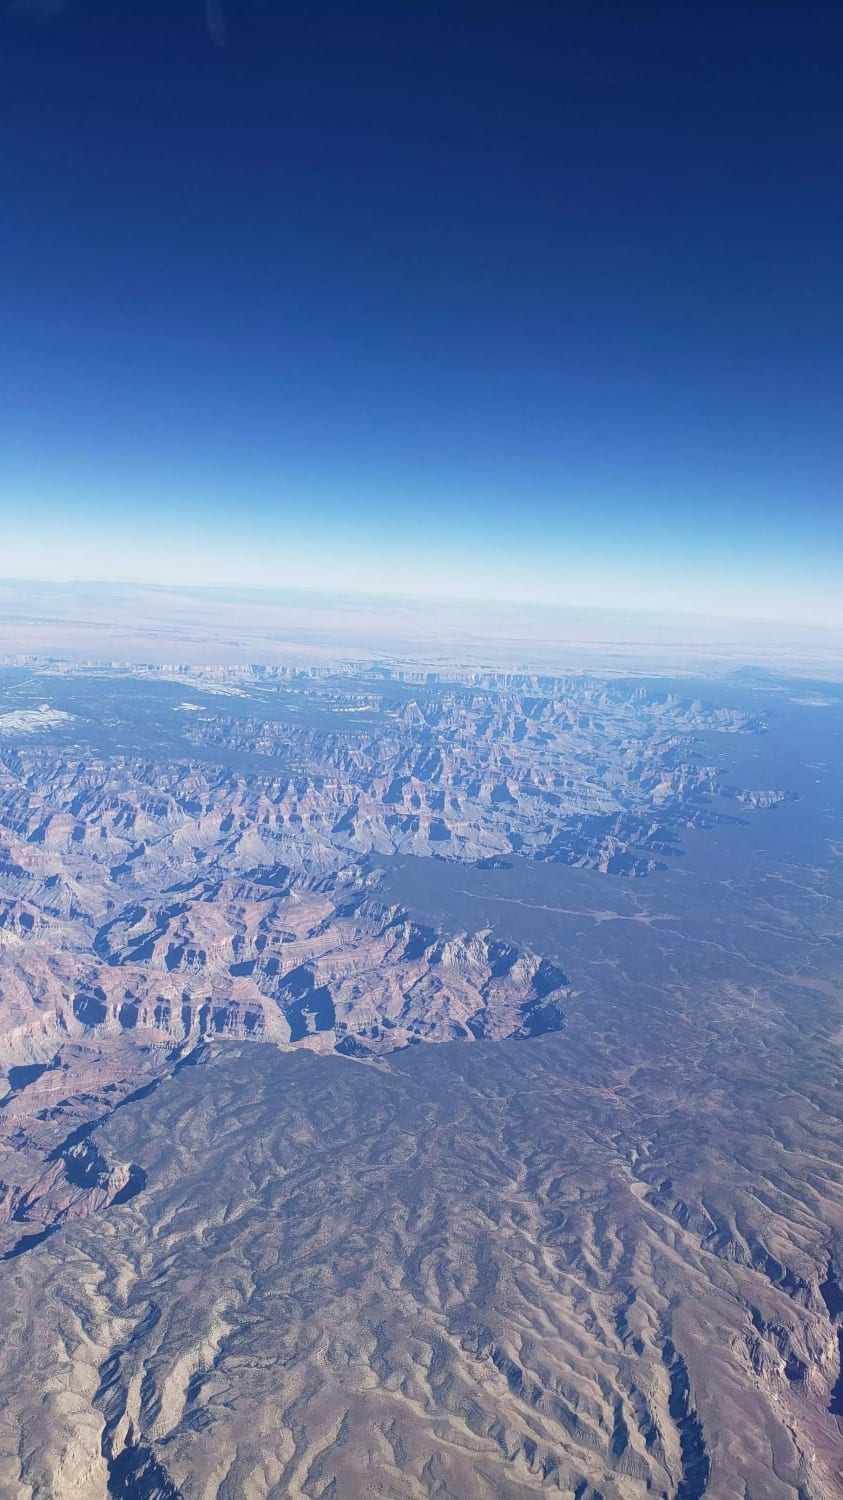 Turns out flying from Seattle to Phoenix takes you directly over the Grand Canyon